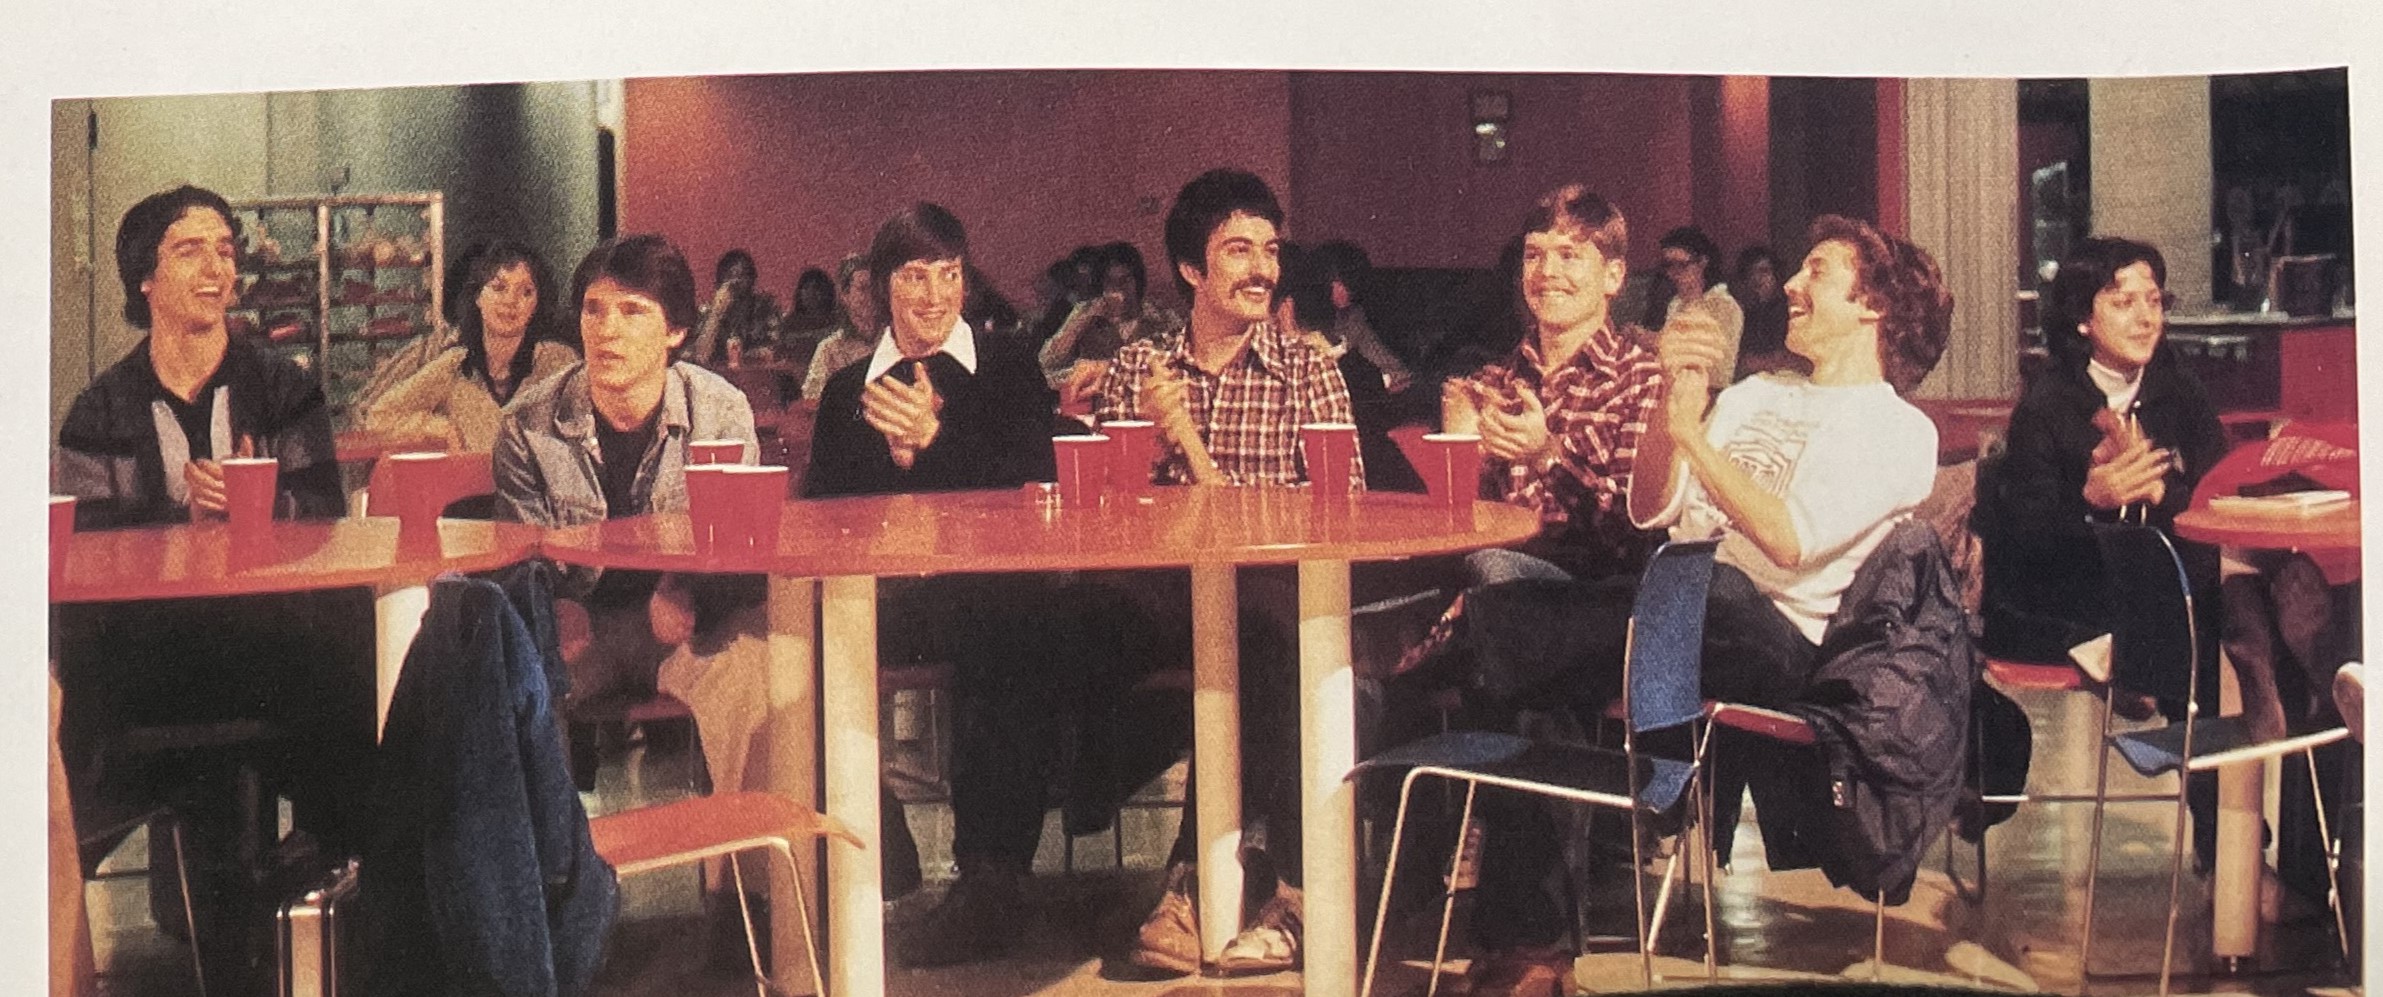 A group of students sitting at a table smiling and laughing.